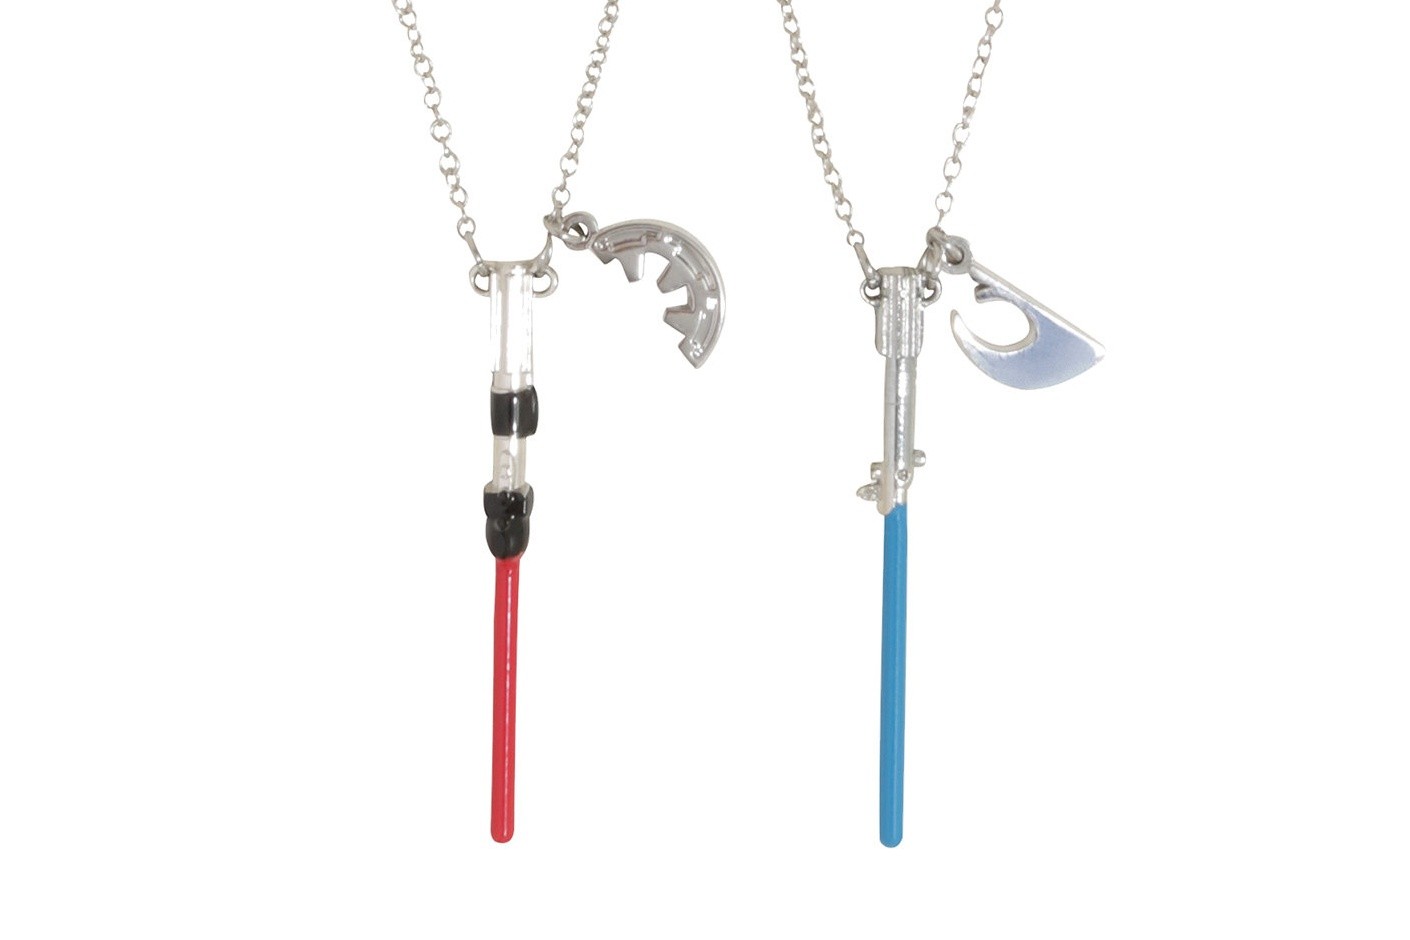 Star Wars Lightsaber Best Friends necklace jewelry set at Hot Topic